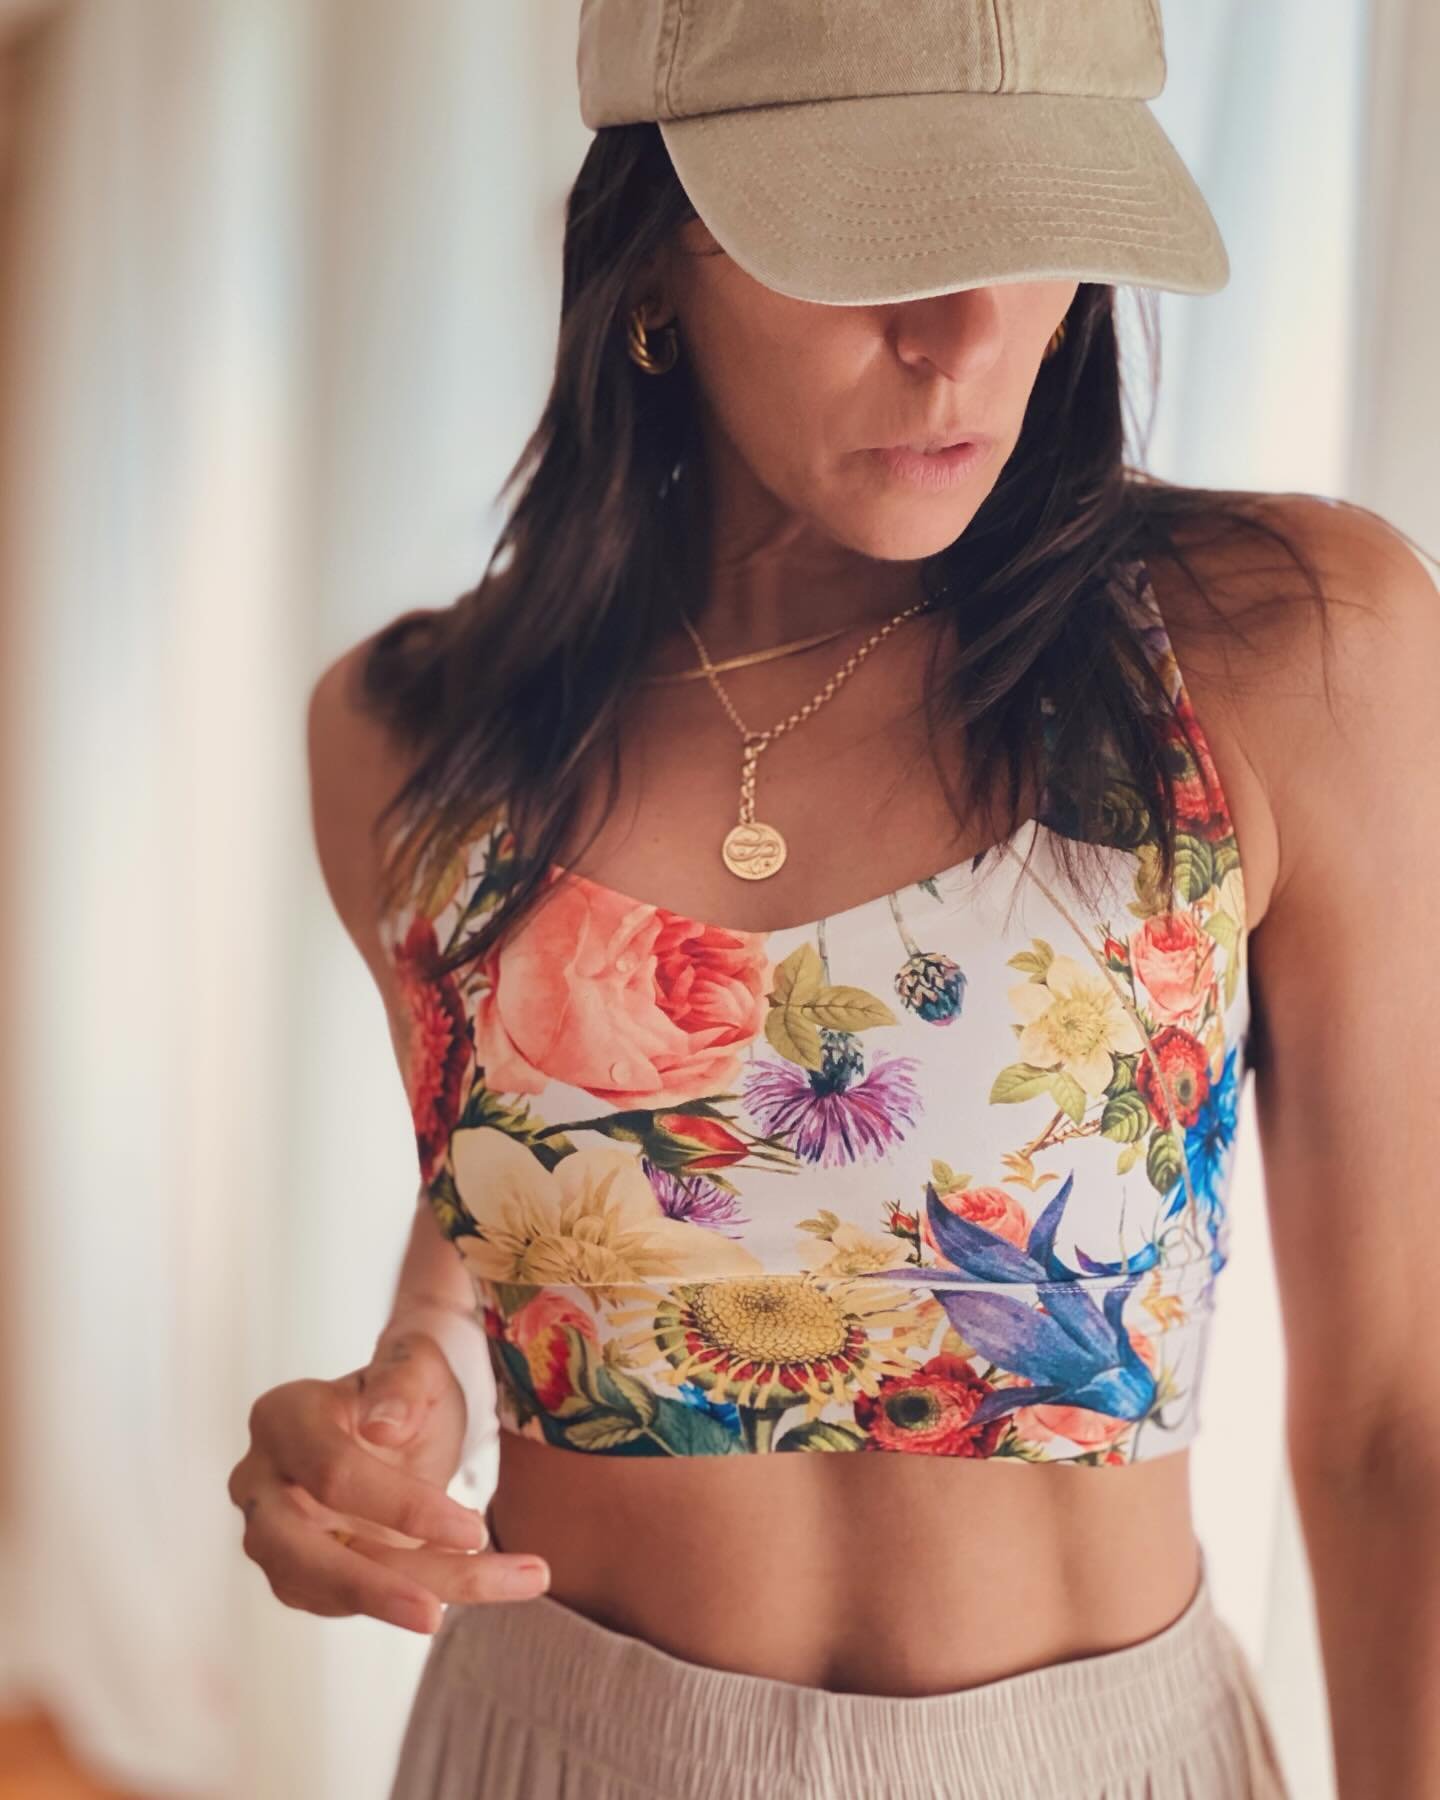 Pretty prints @fortheloveofrockstars 

This sports bra or crop top is super versatile and offers the most comfortable fit! It&rsquo;s supportive, soft, and holds you in all the right places. I&rsquo;m wearing a size small, and for reference, I&rsquo;